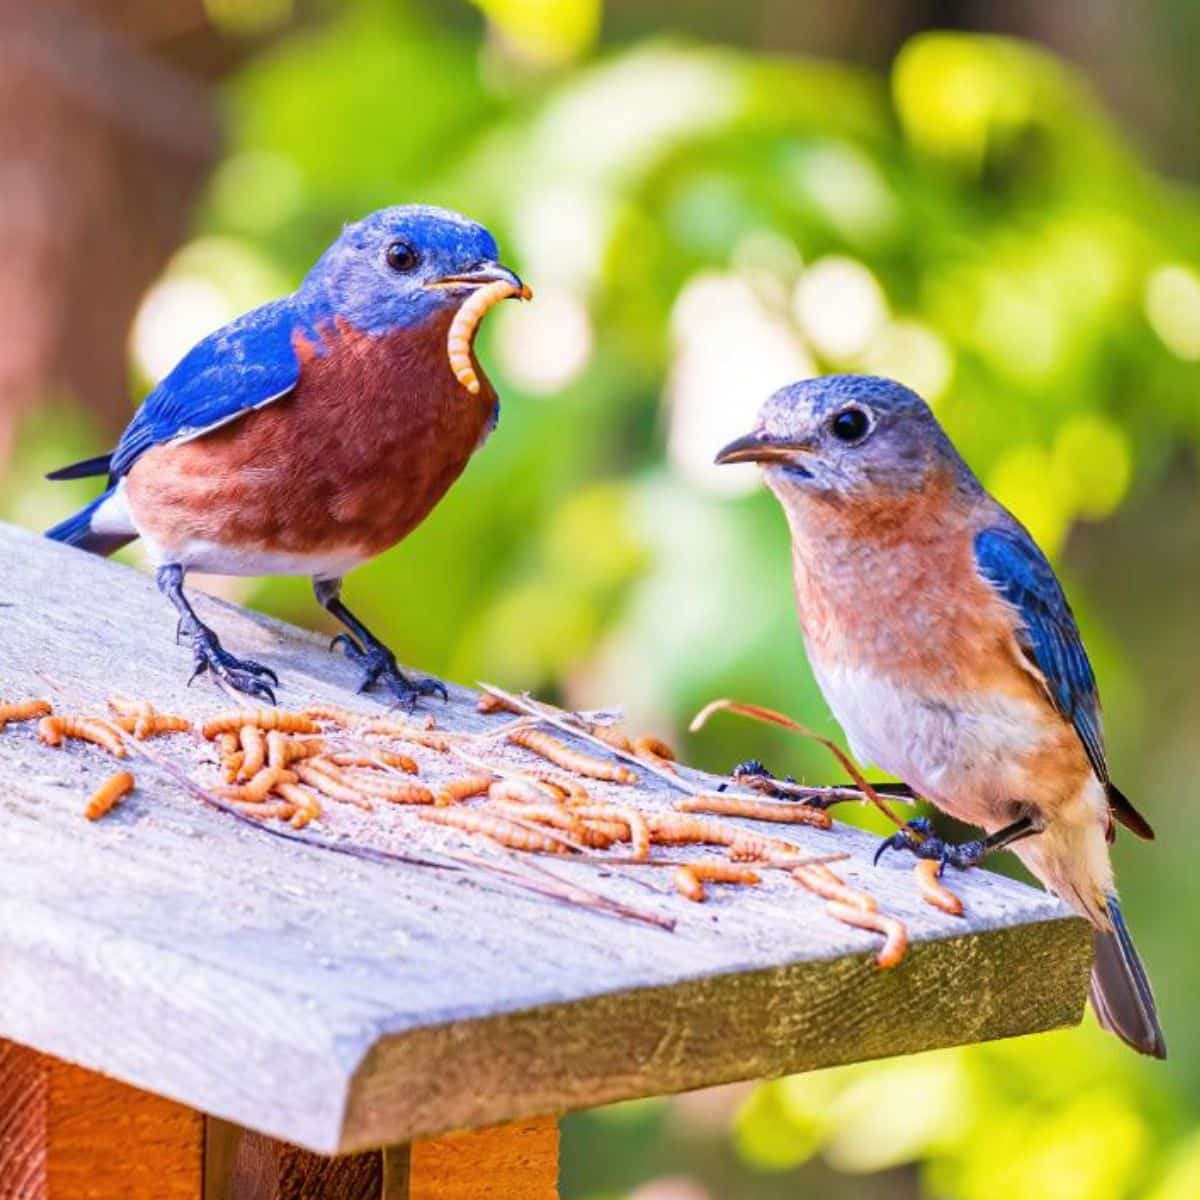 Two bluebirds are eating mealworms on the top of a birdhouse.